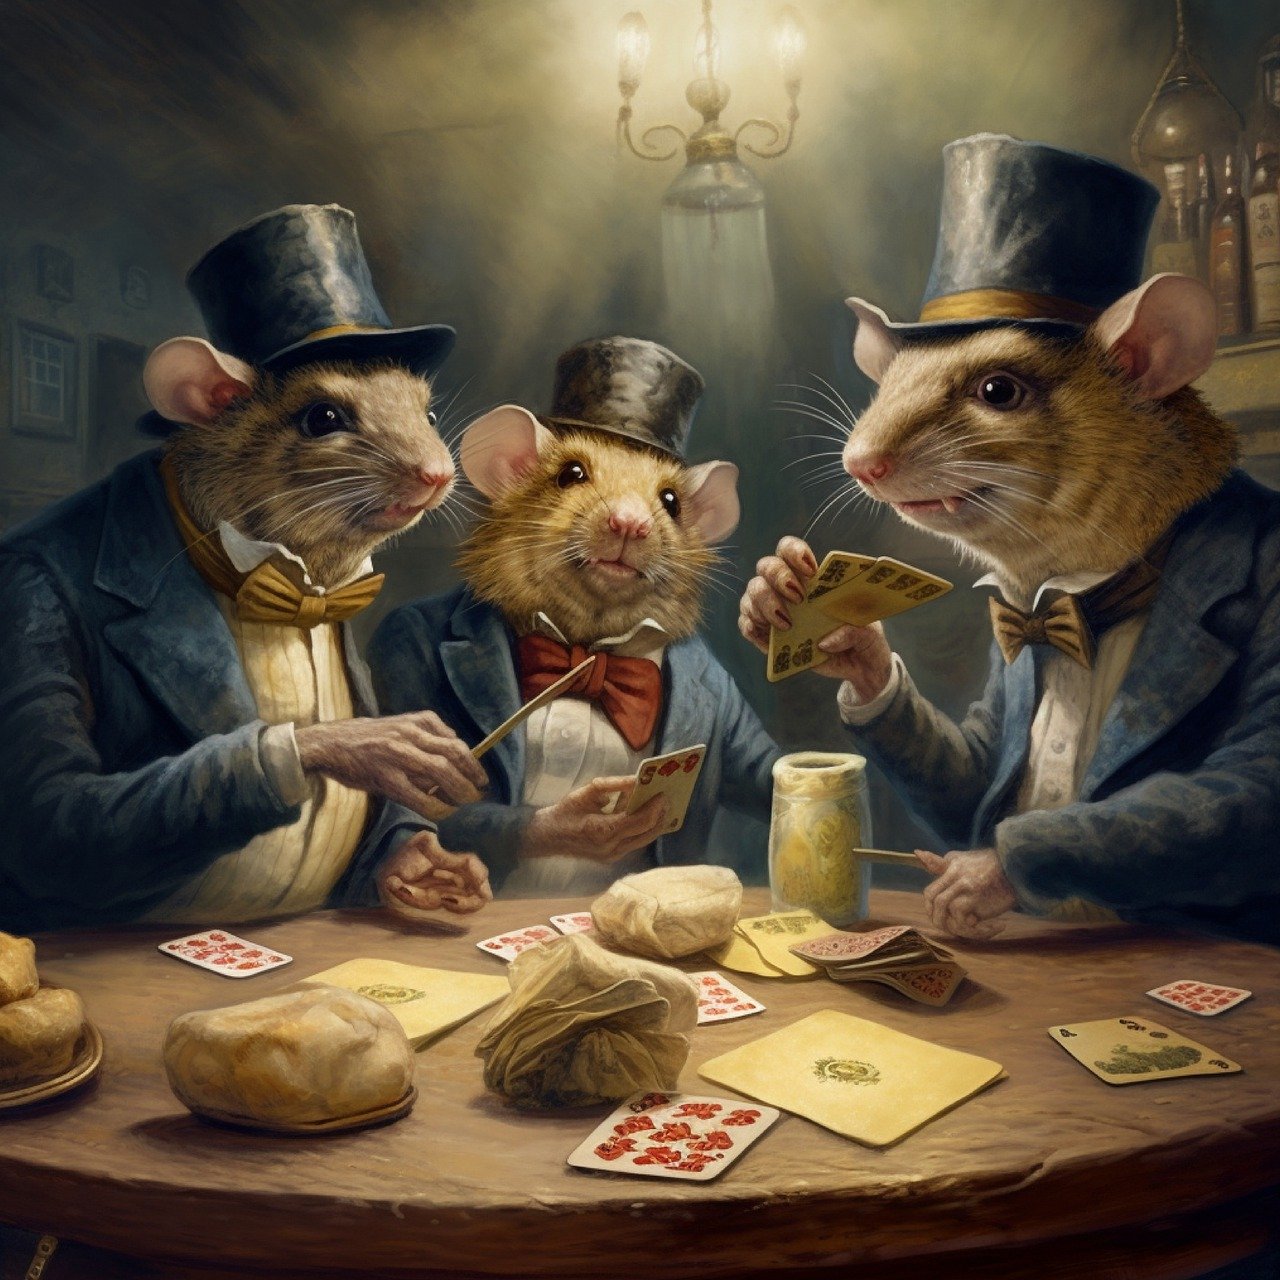 poker raises image of rats playing poker in top hats